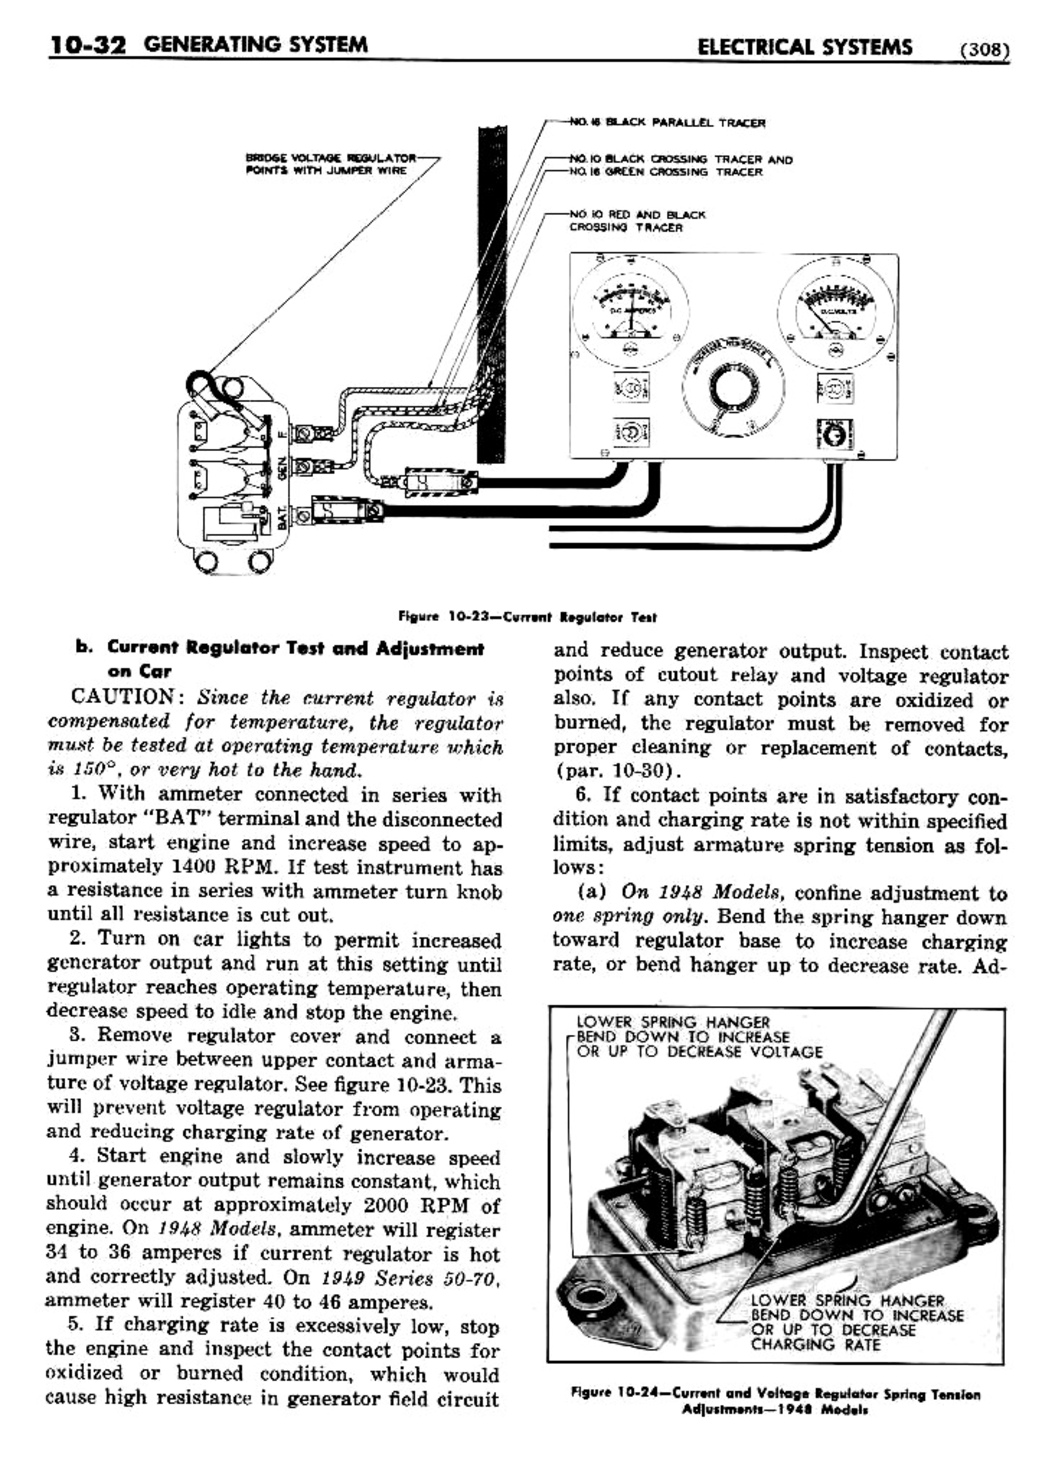 n_11 1948 Buick Shop Manual - Electrical Systems-032-032.jpg